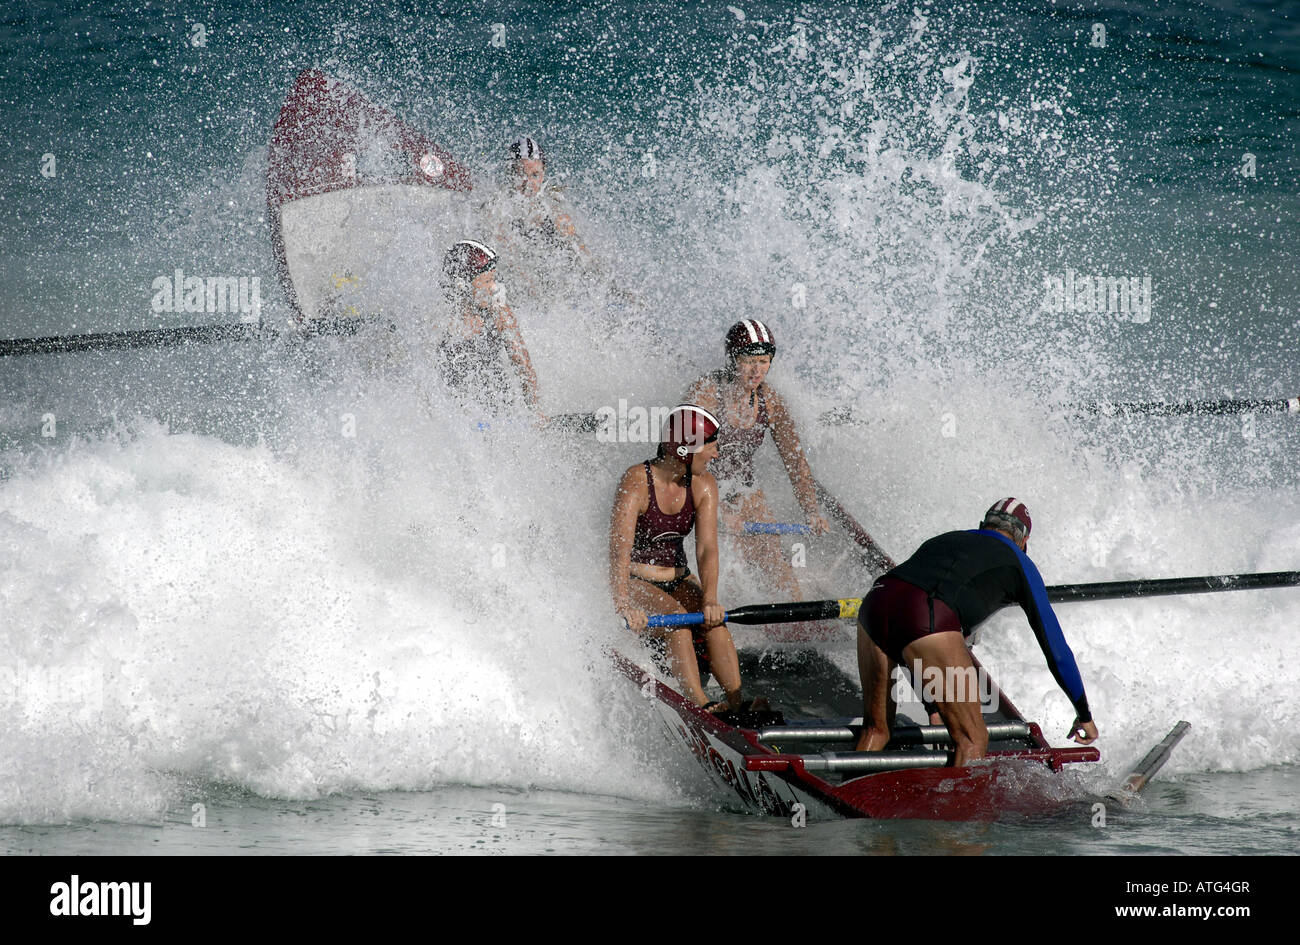 Women's surf boat event in the National Surf Lifesaving Championships at Scarborough Beach, Perth, Western Australia Stock Photo